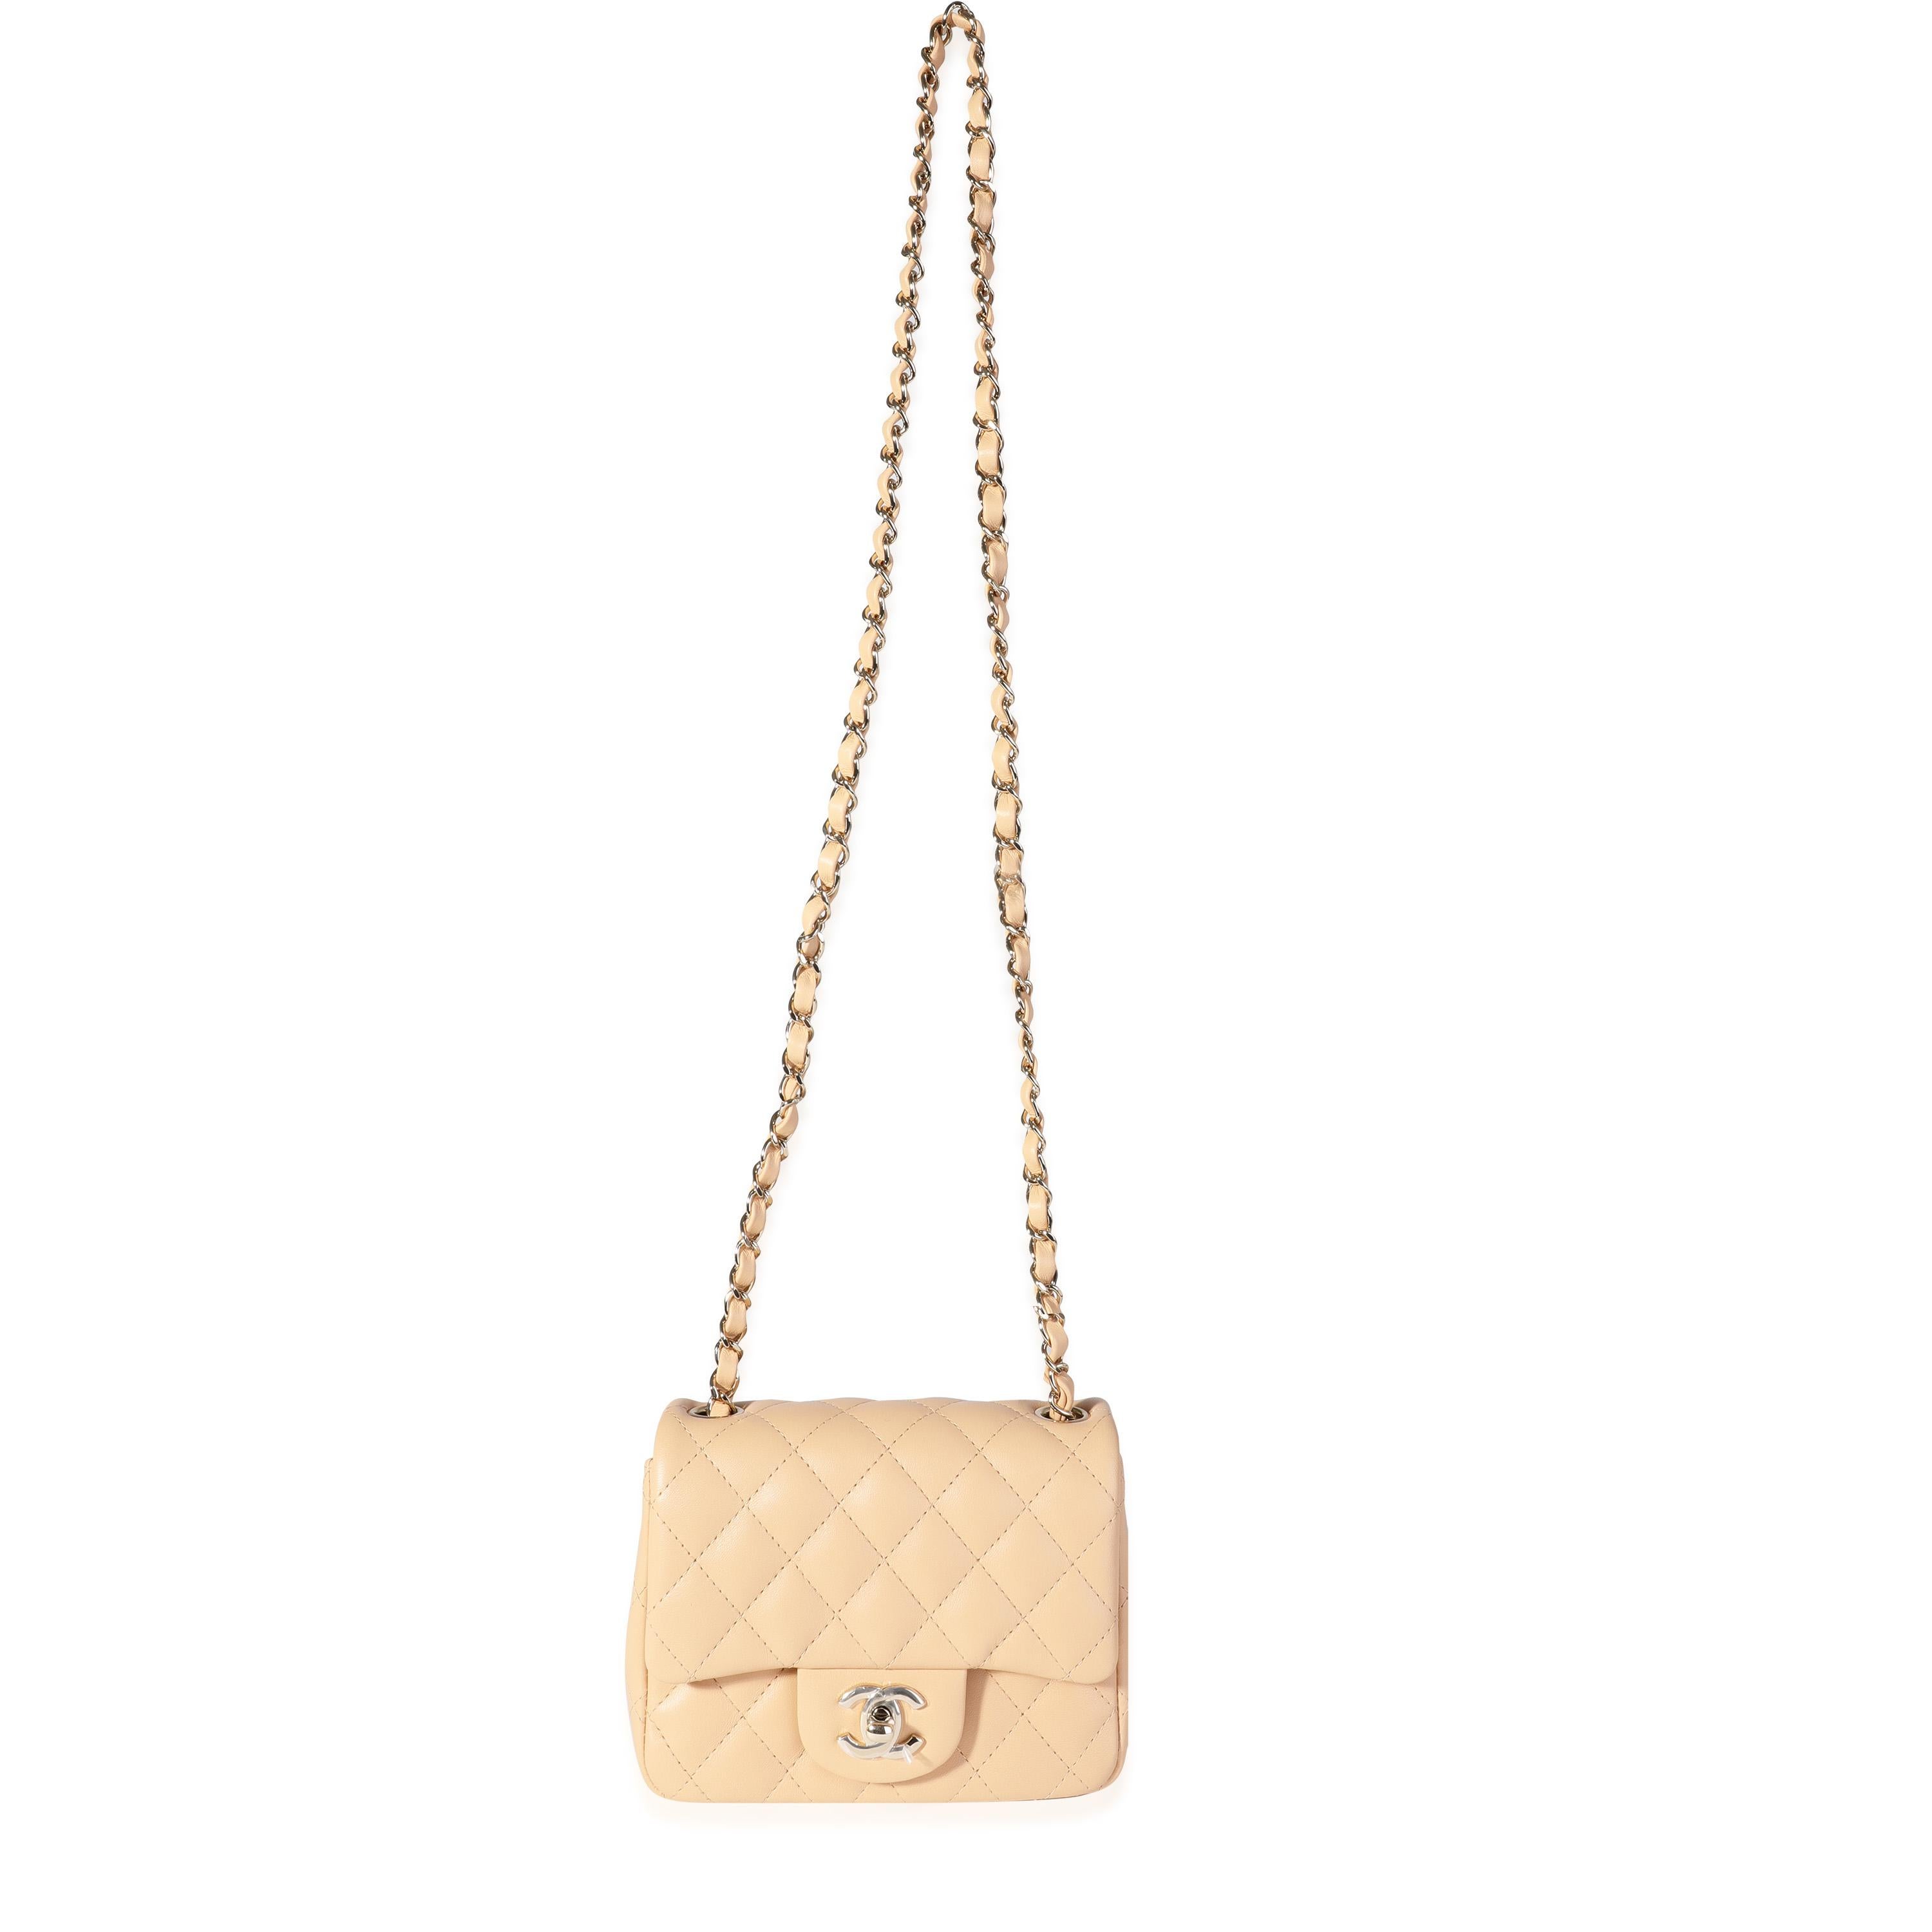 Listing Title: Chanel Beige Quilted Lambskin Mini Square Classic Flap Bag
SKU: 116647
Handbag Condition: Never Worn
Brand: Chanel
Model: Chanel Lambskin Classic Mini Square Flap
Origin Country: Italy
Handbag Silhouette: Crossbody Bag;Shoulder